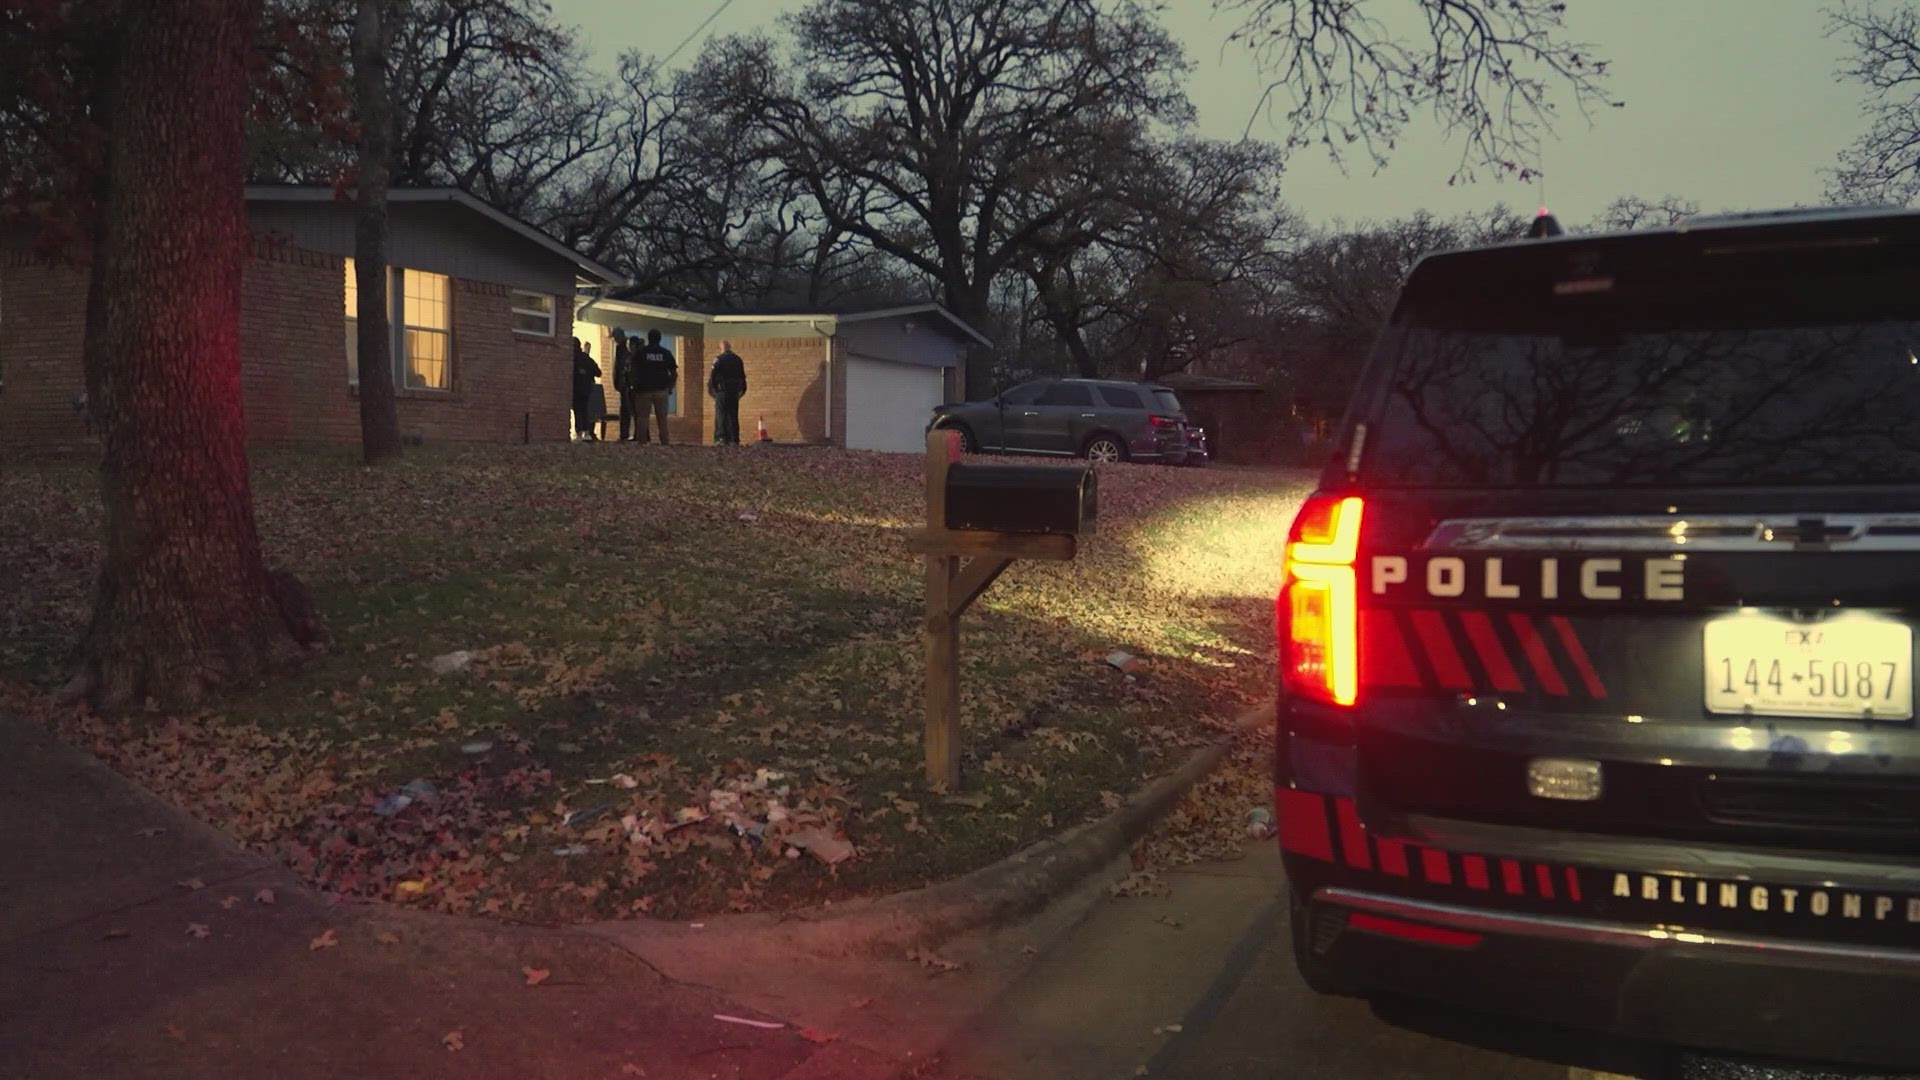 The home intruder broke every window of the home, sources told WFAA. Police said no one will be facing any charges.